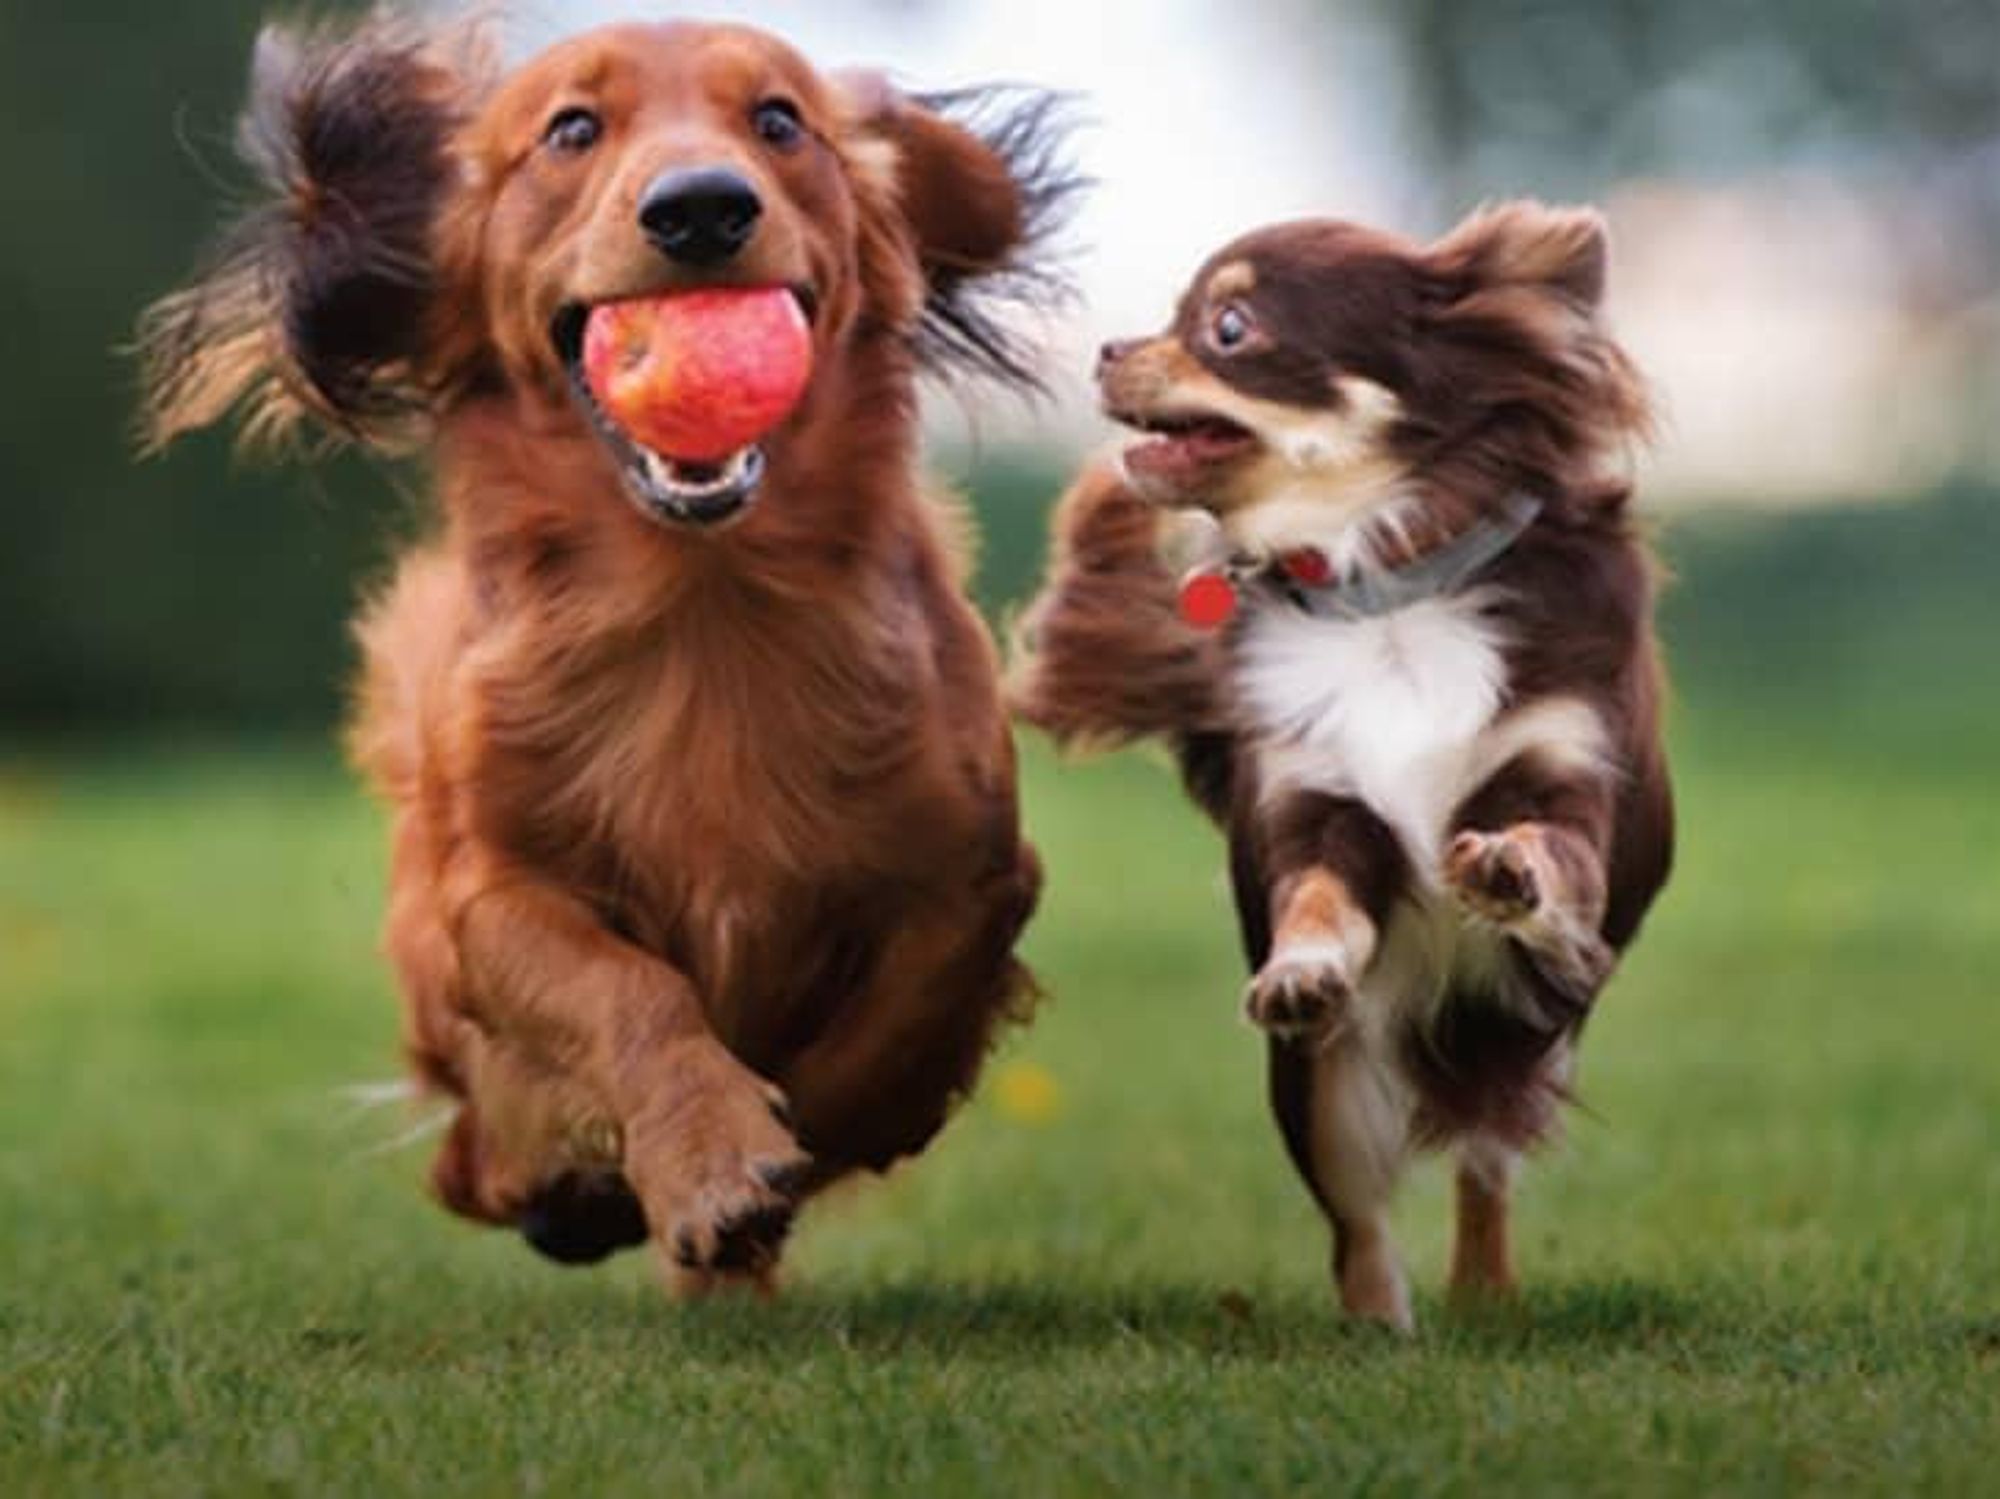 Two dogs running in a park